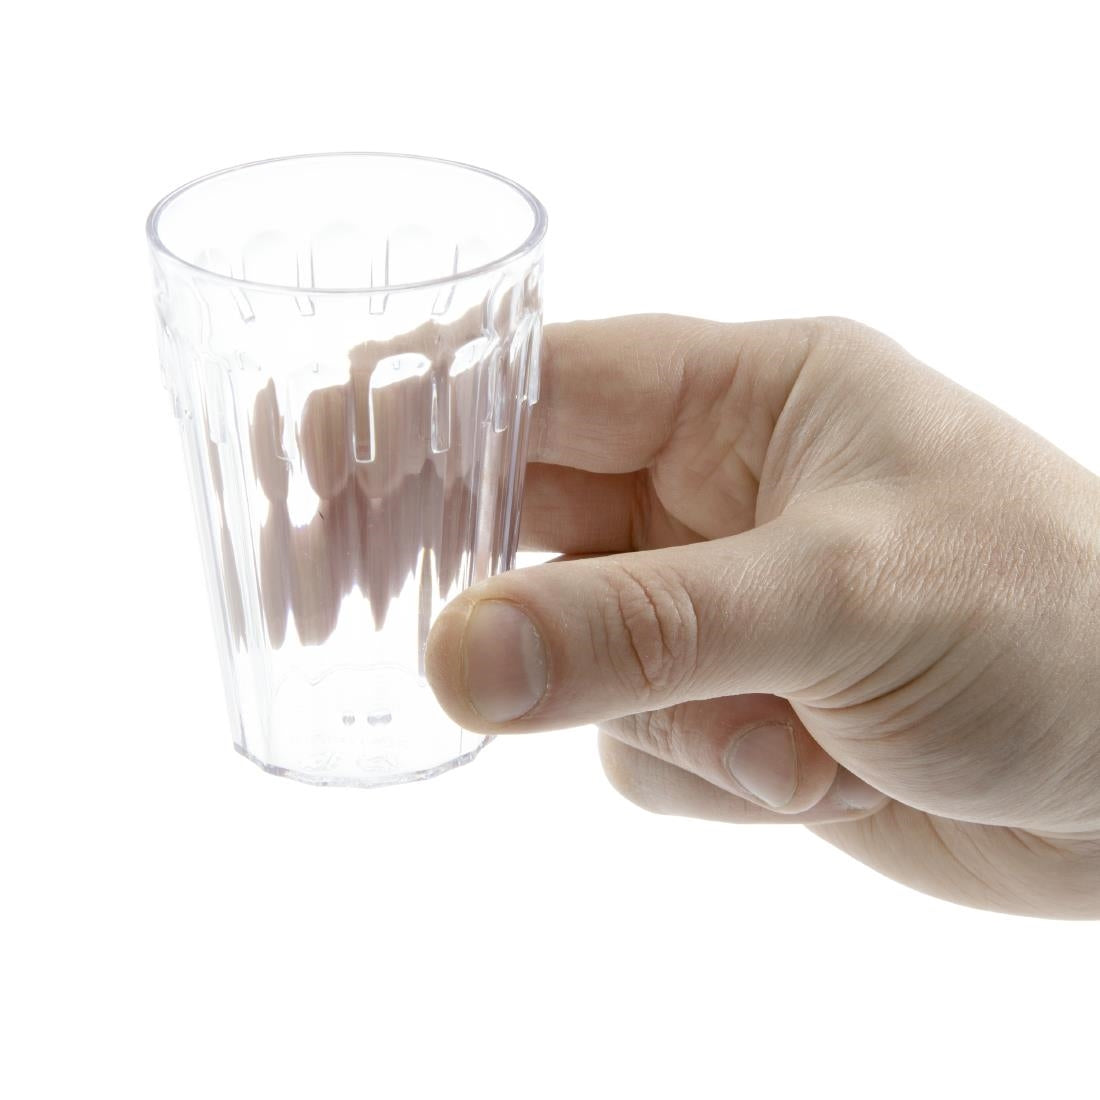 DP239 Kristallon Polycarbonate Tumblers 142ml (Pack of 12) JD Catering Equipment Solutions Ltd